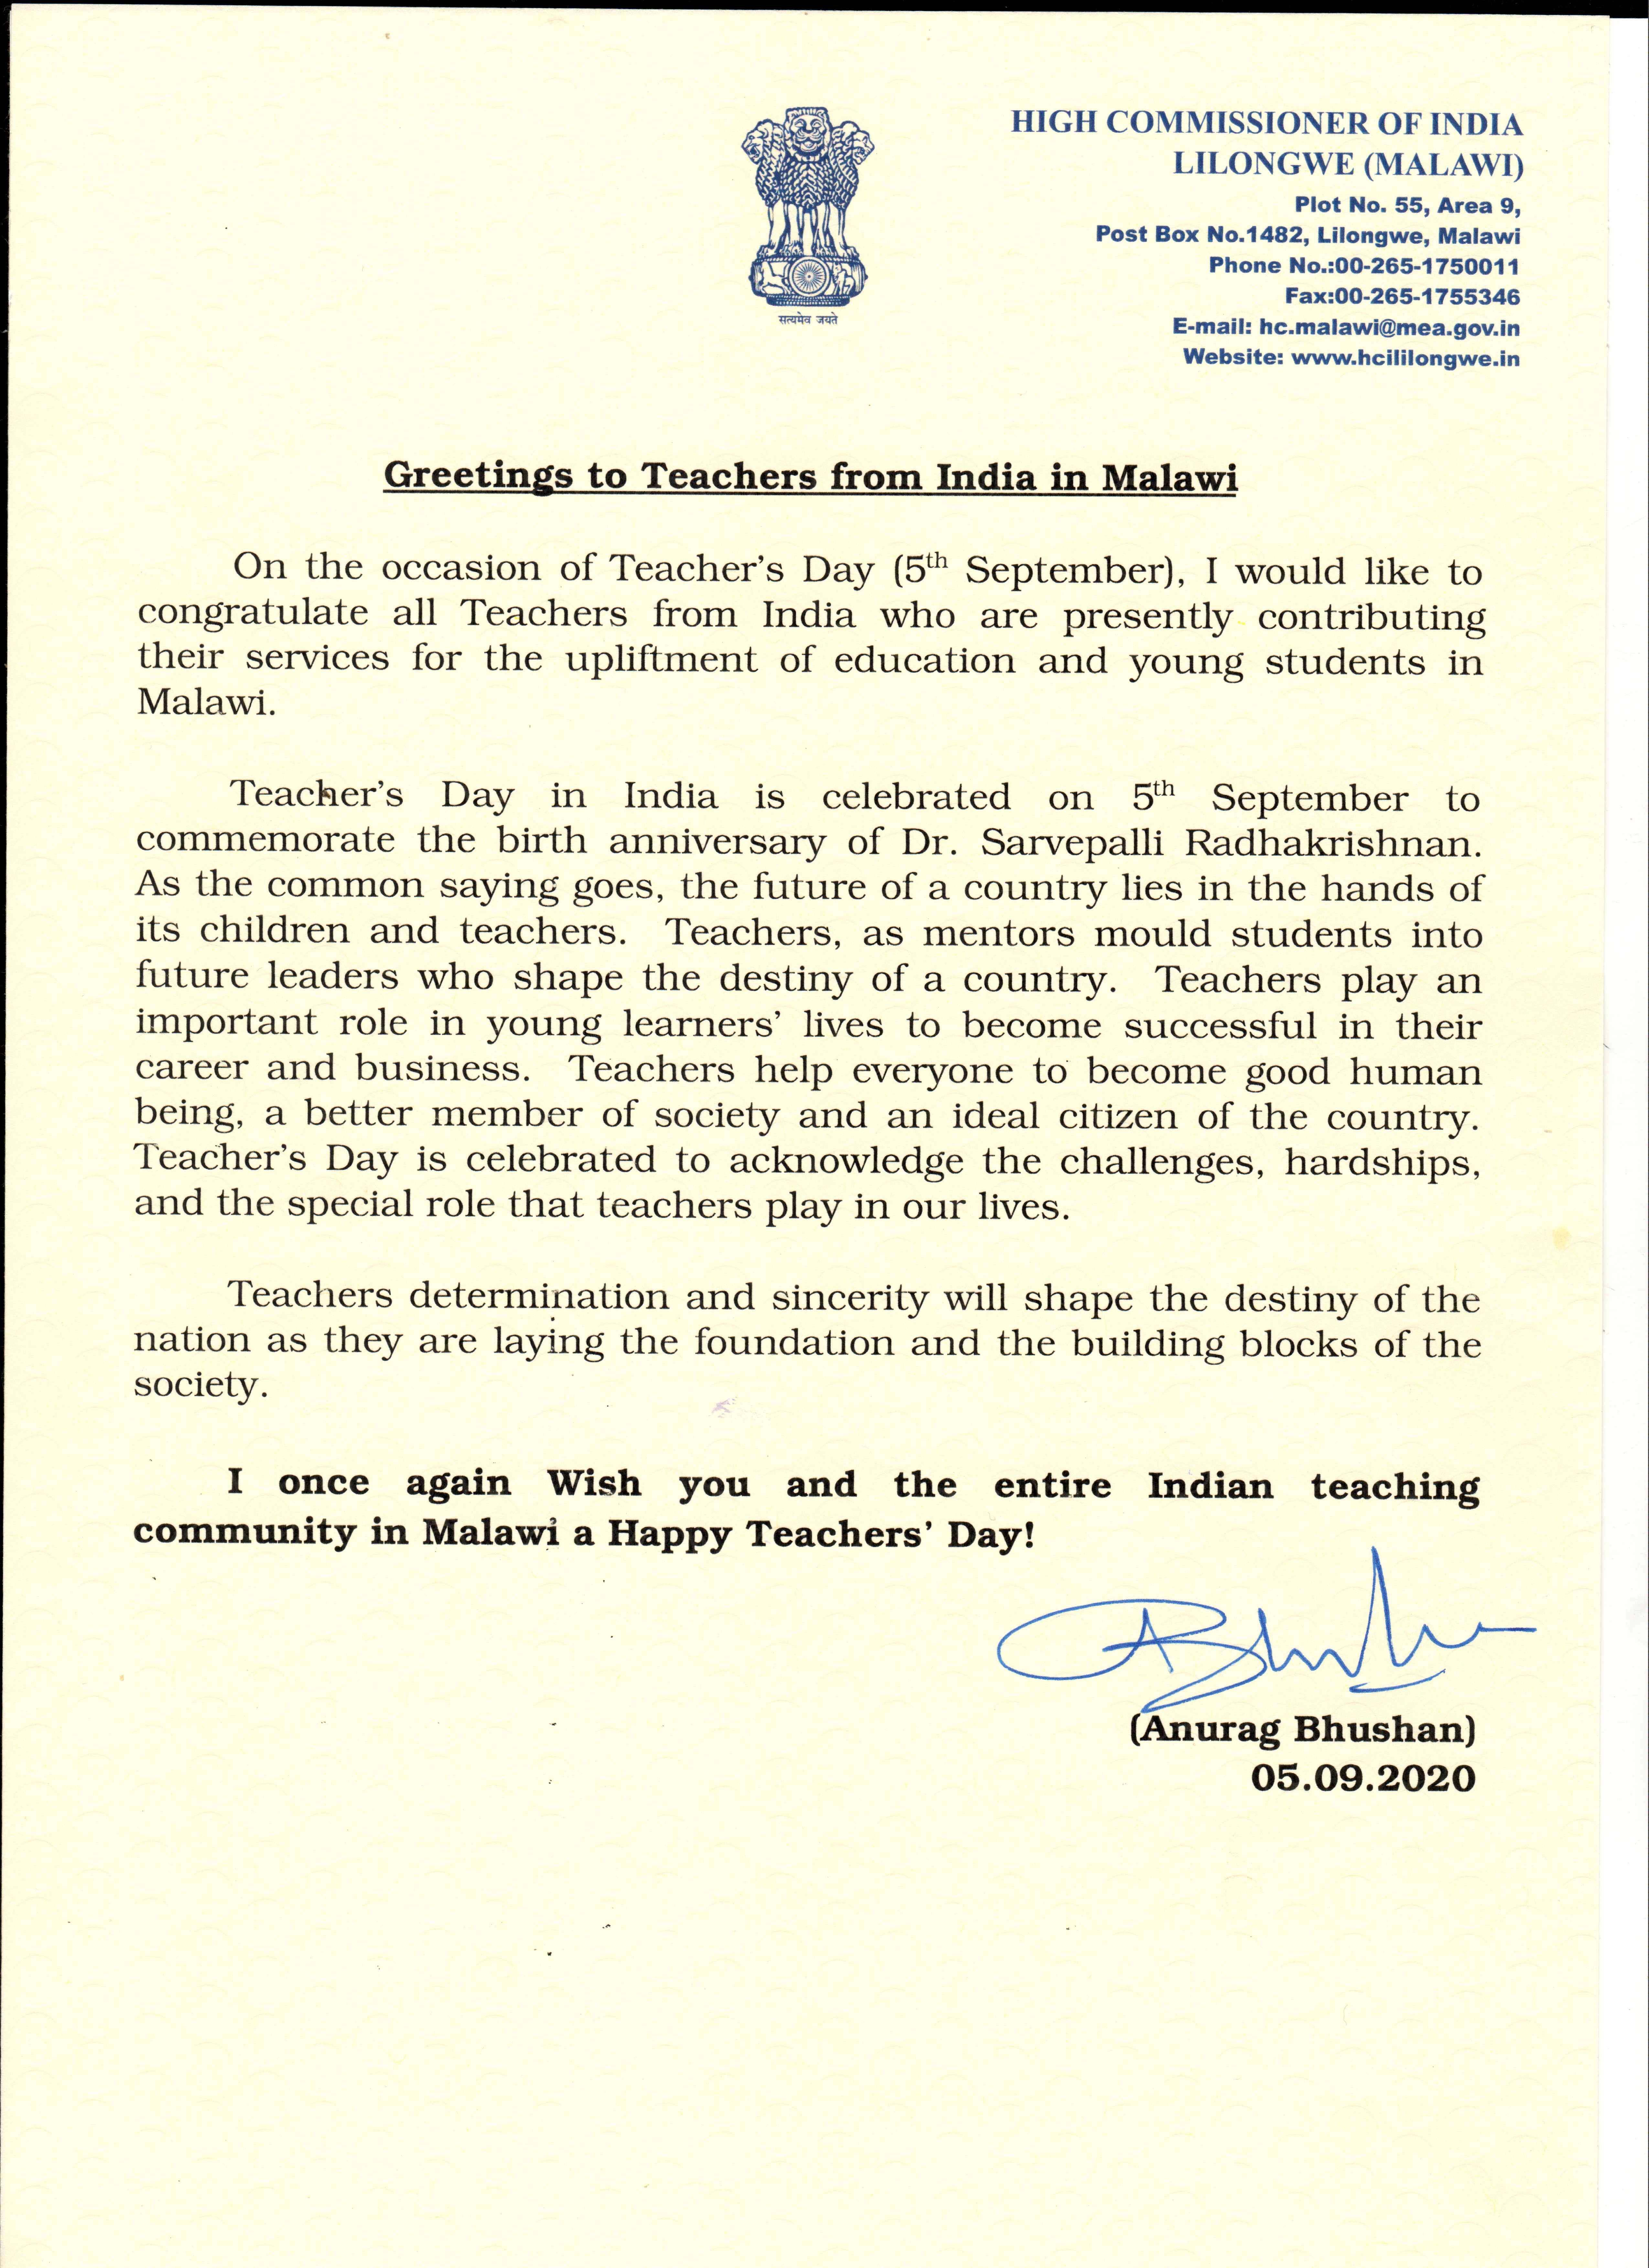 Message from High Commissioner to Teachers from India in Malawi on Teacher's Day.